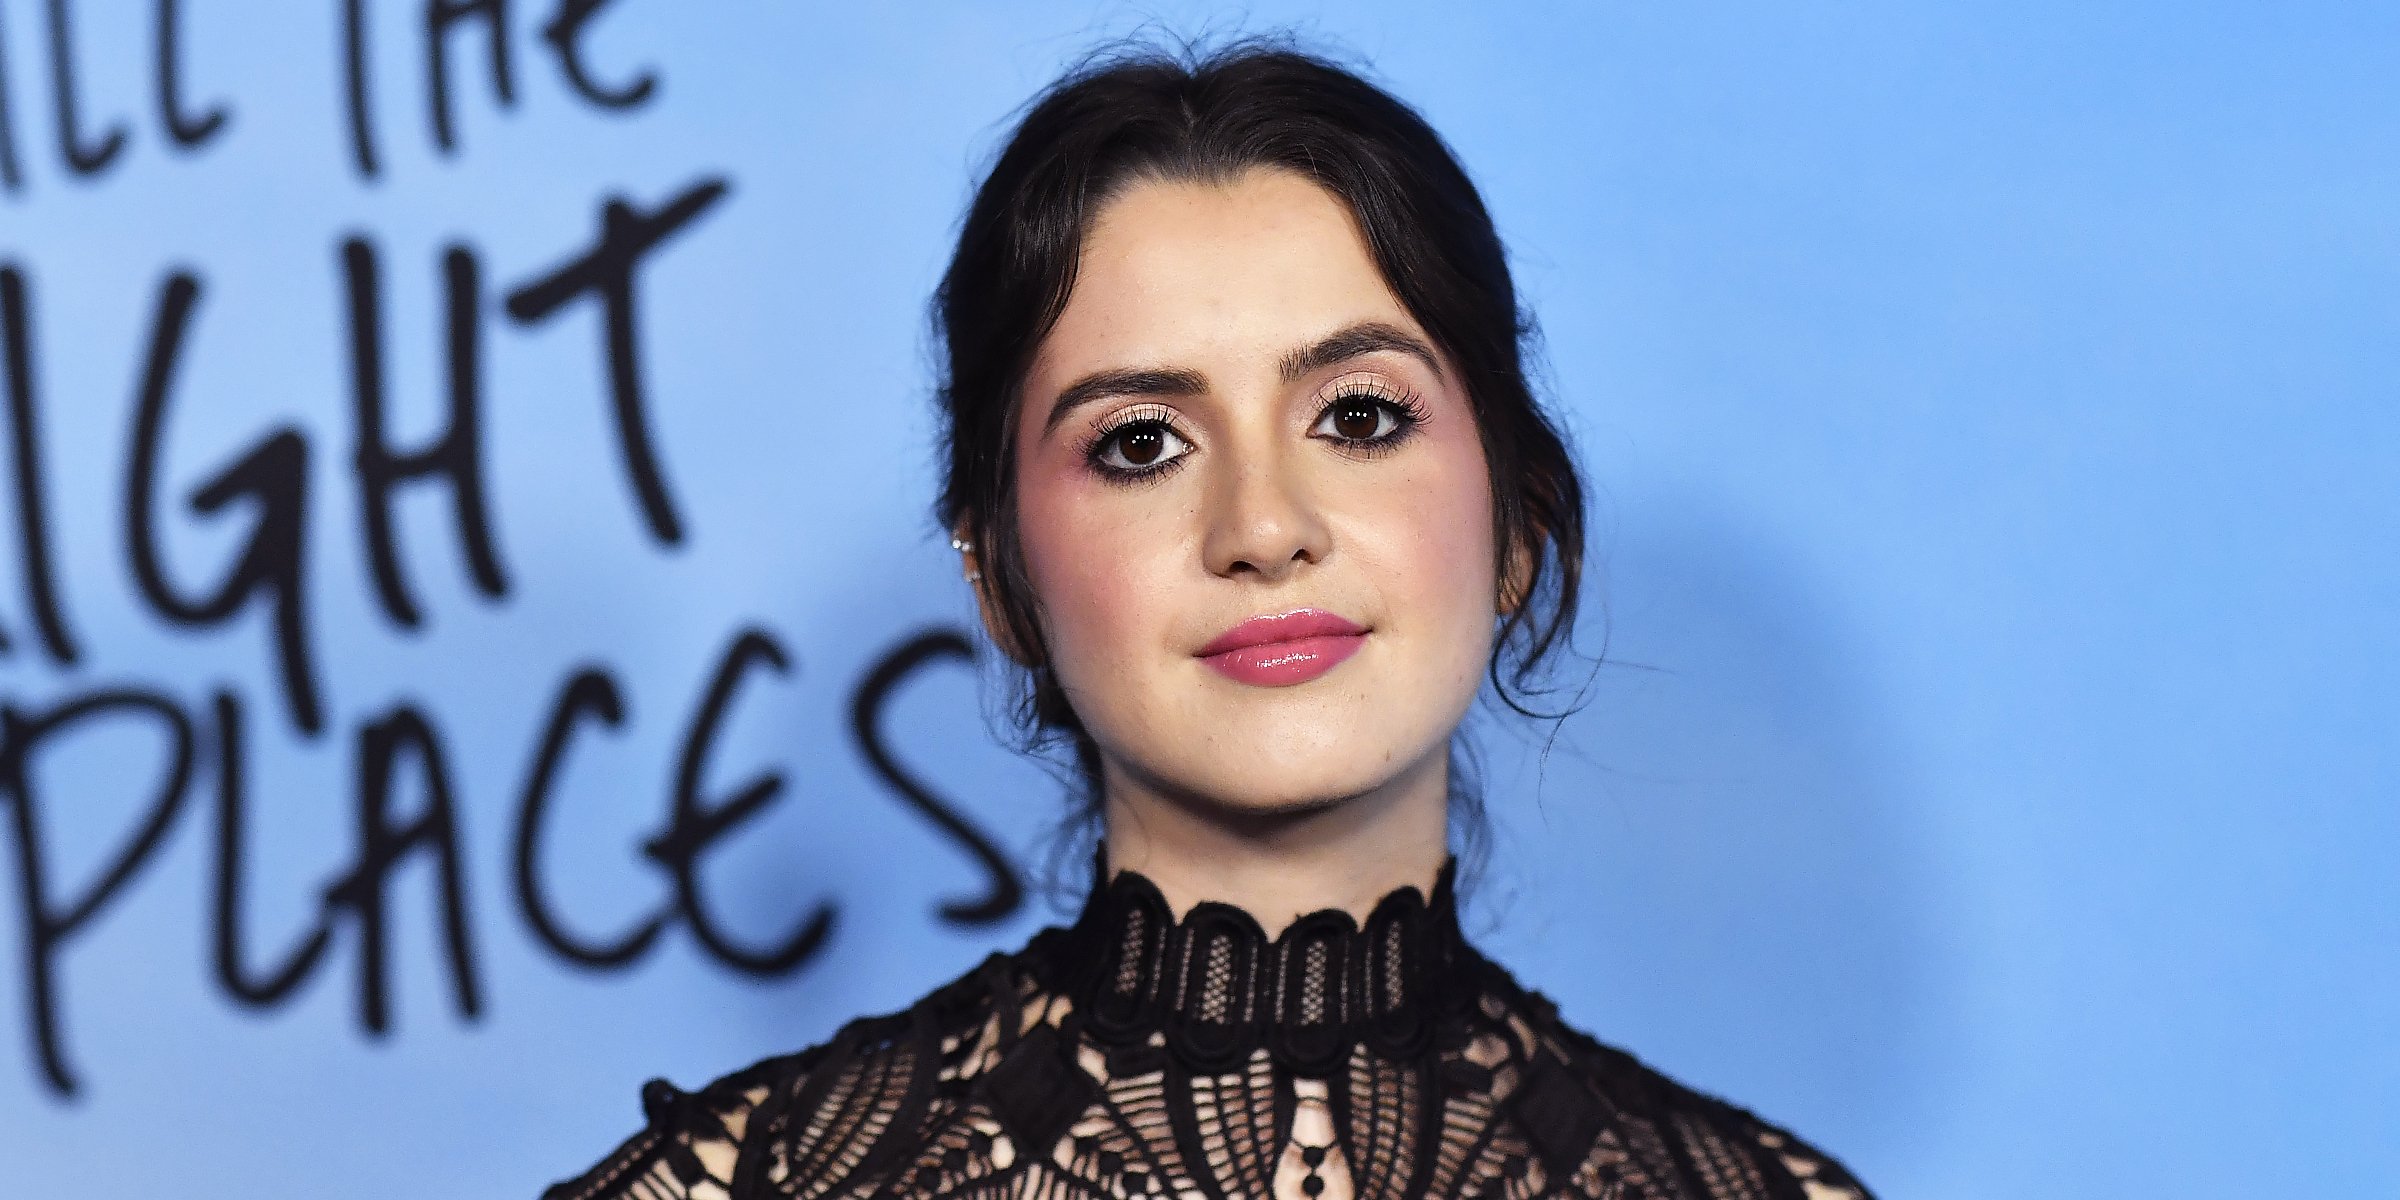 Actress Laura Marano. | Source: Getty Images